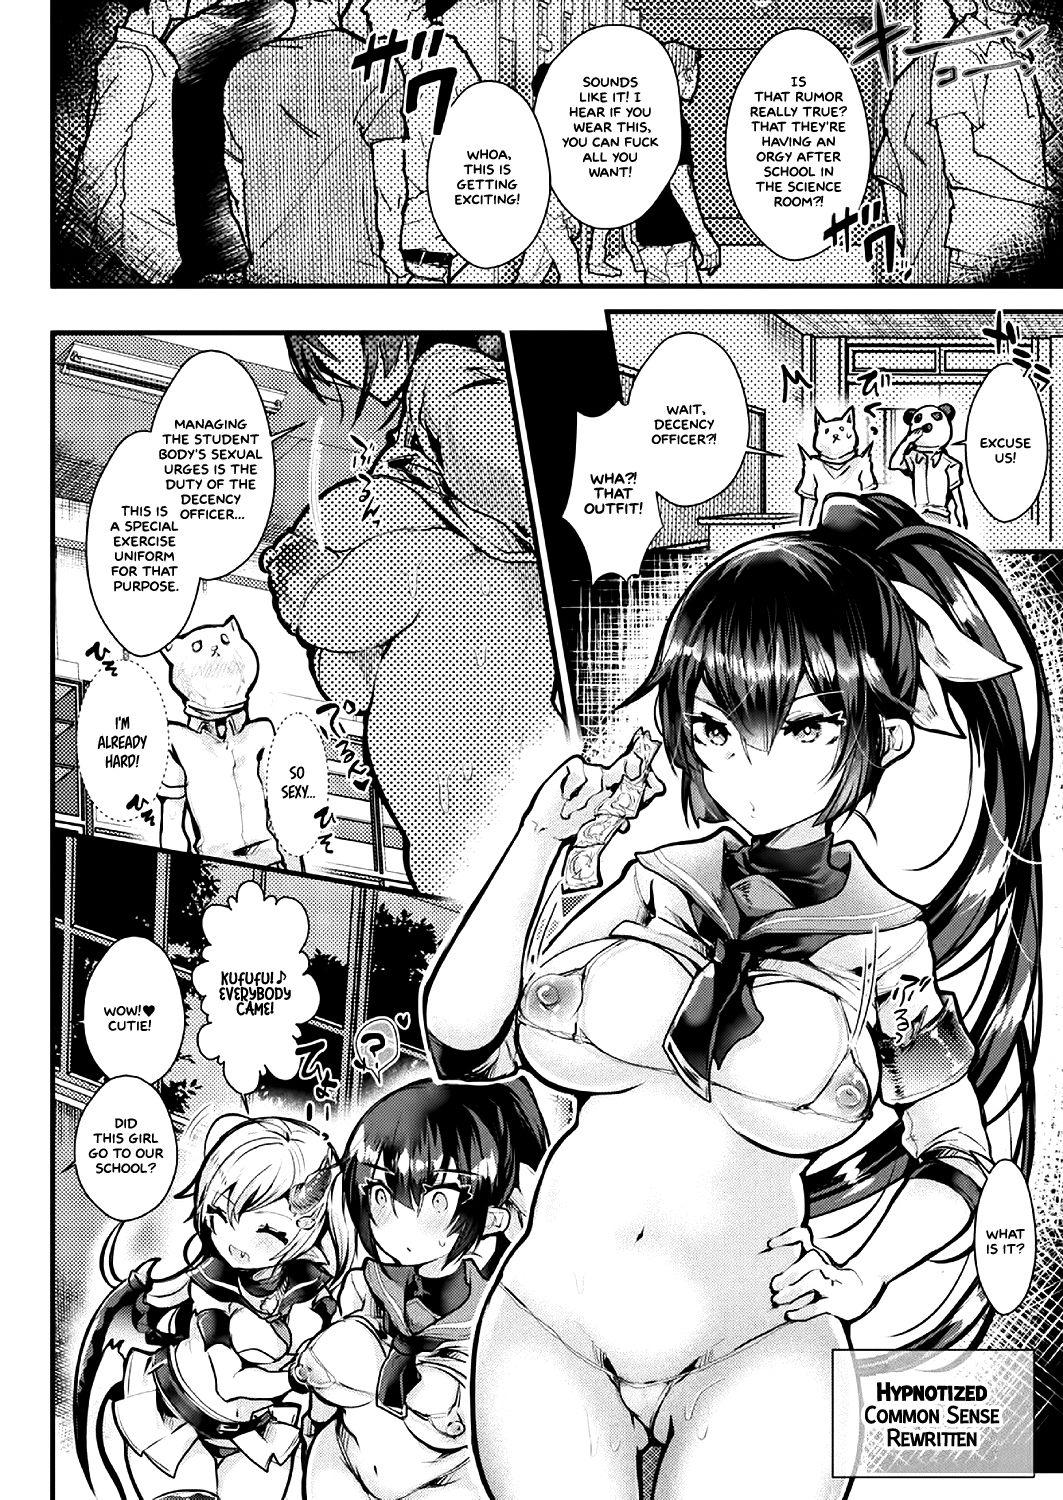 Oldyoung Let's join the After School Sex Club! Spa - Page 4